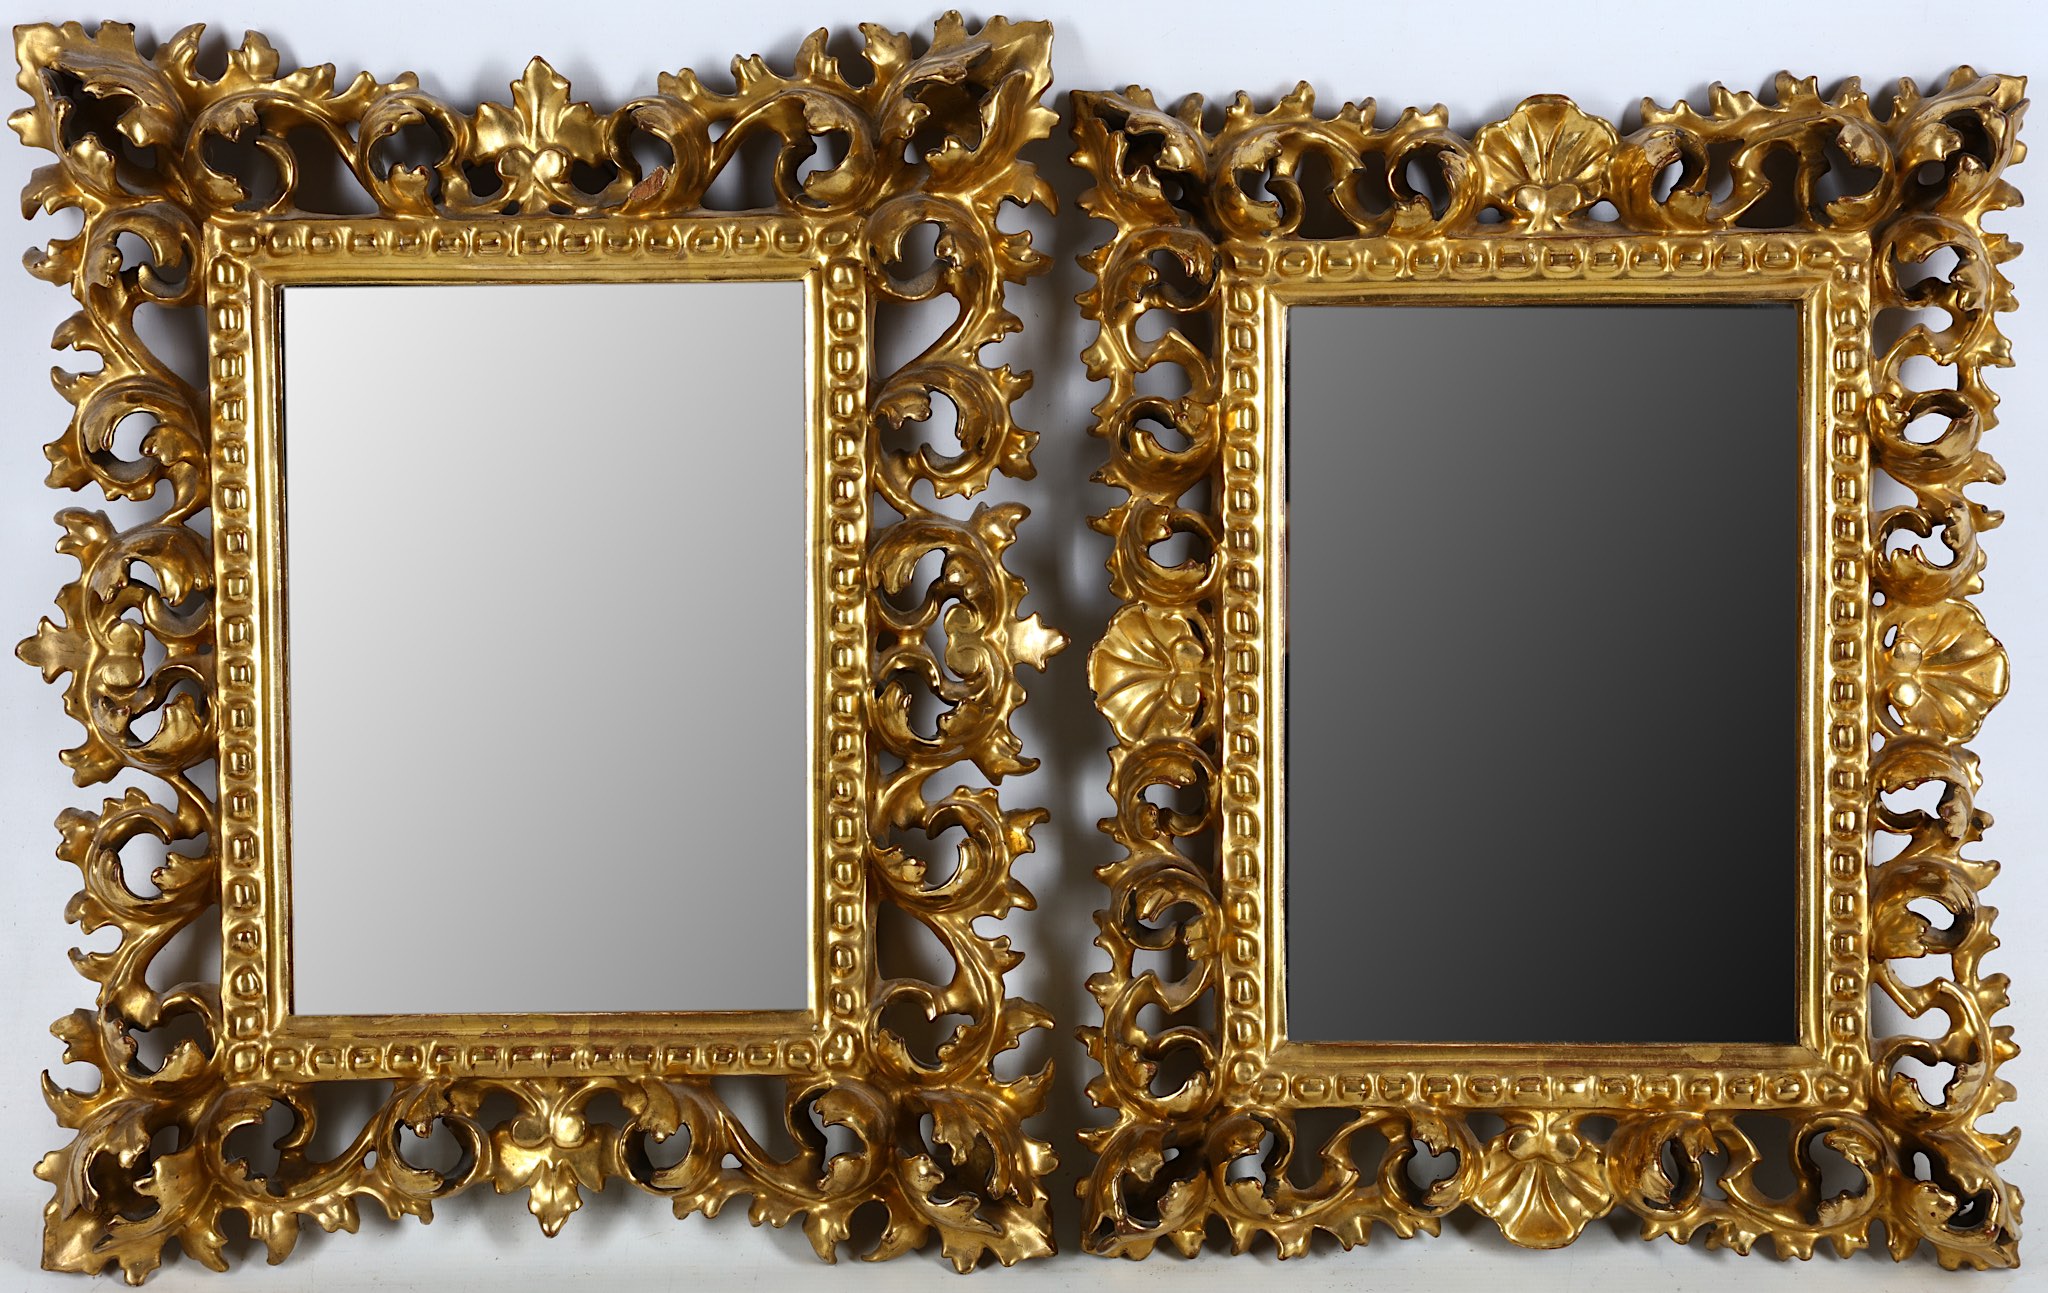 A near pair of Florentine carved giltwood wall mirrors, late 19th or early 20th century, the